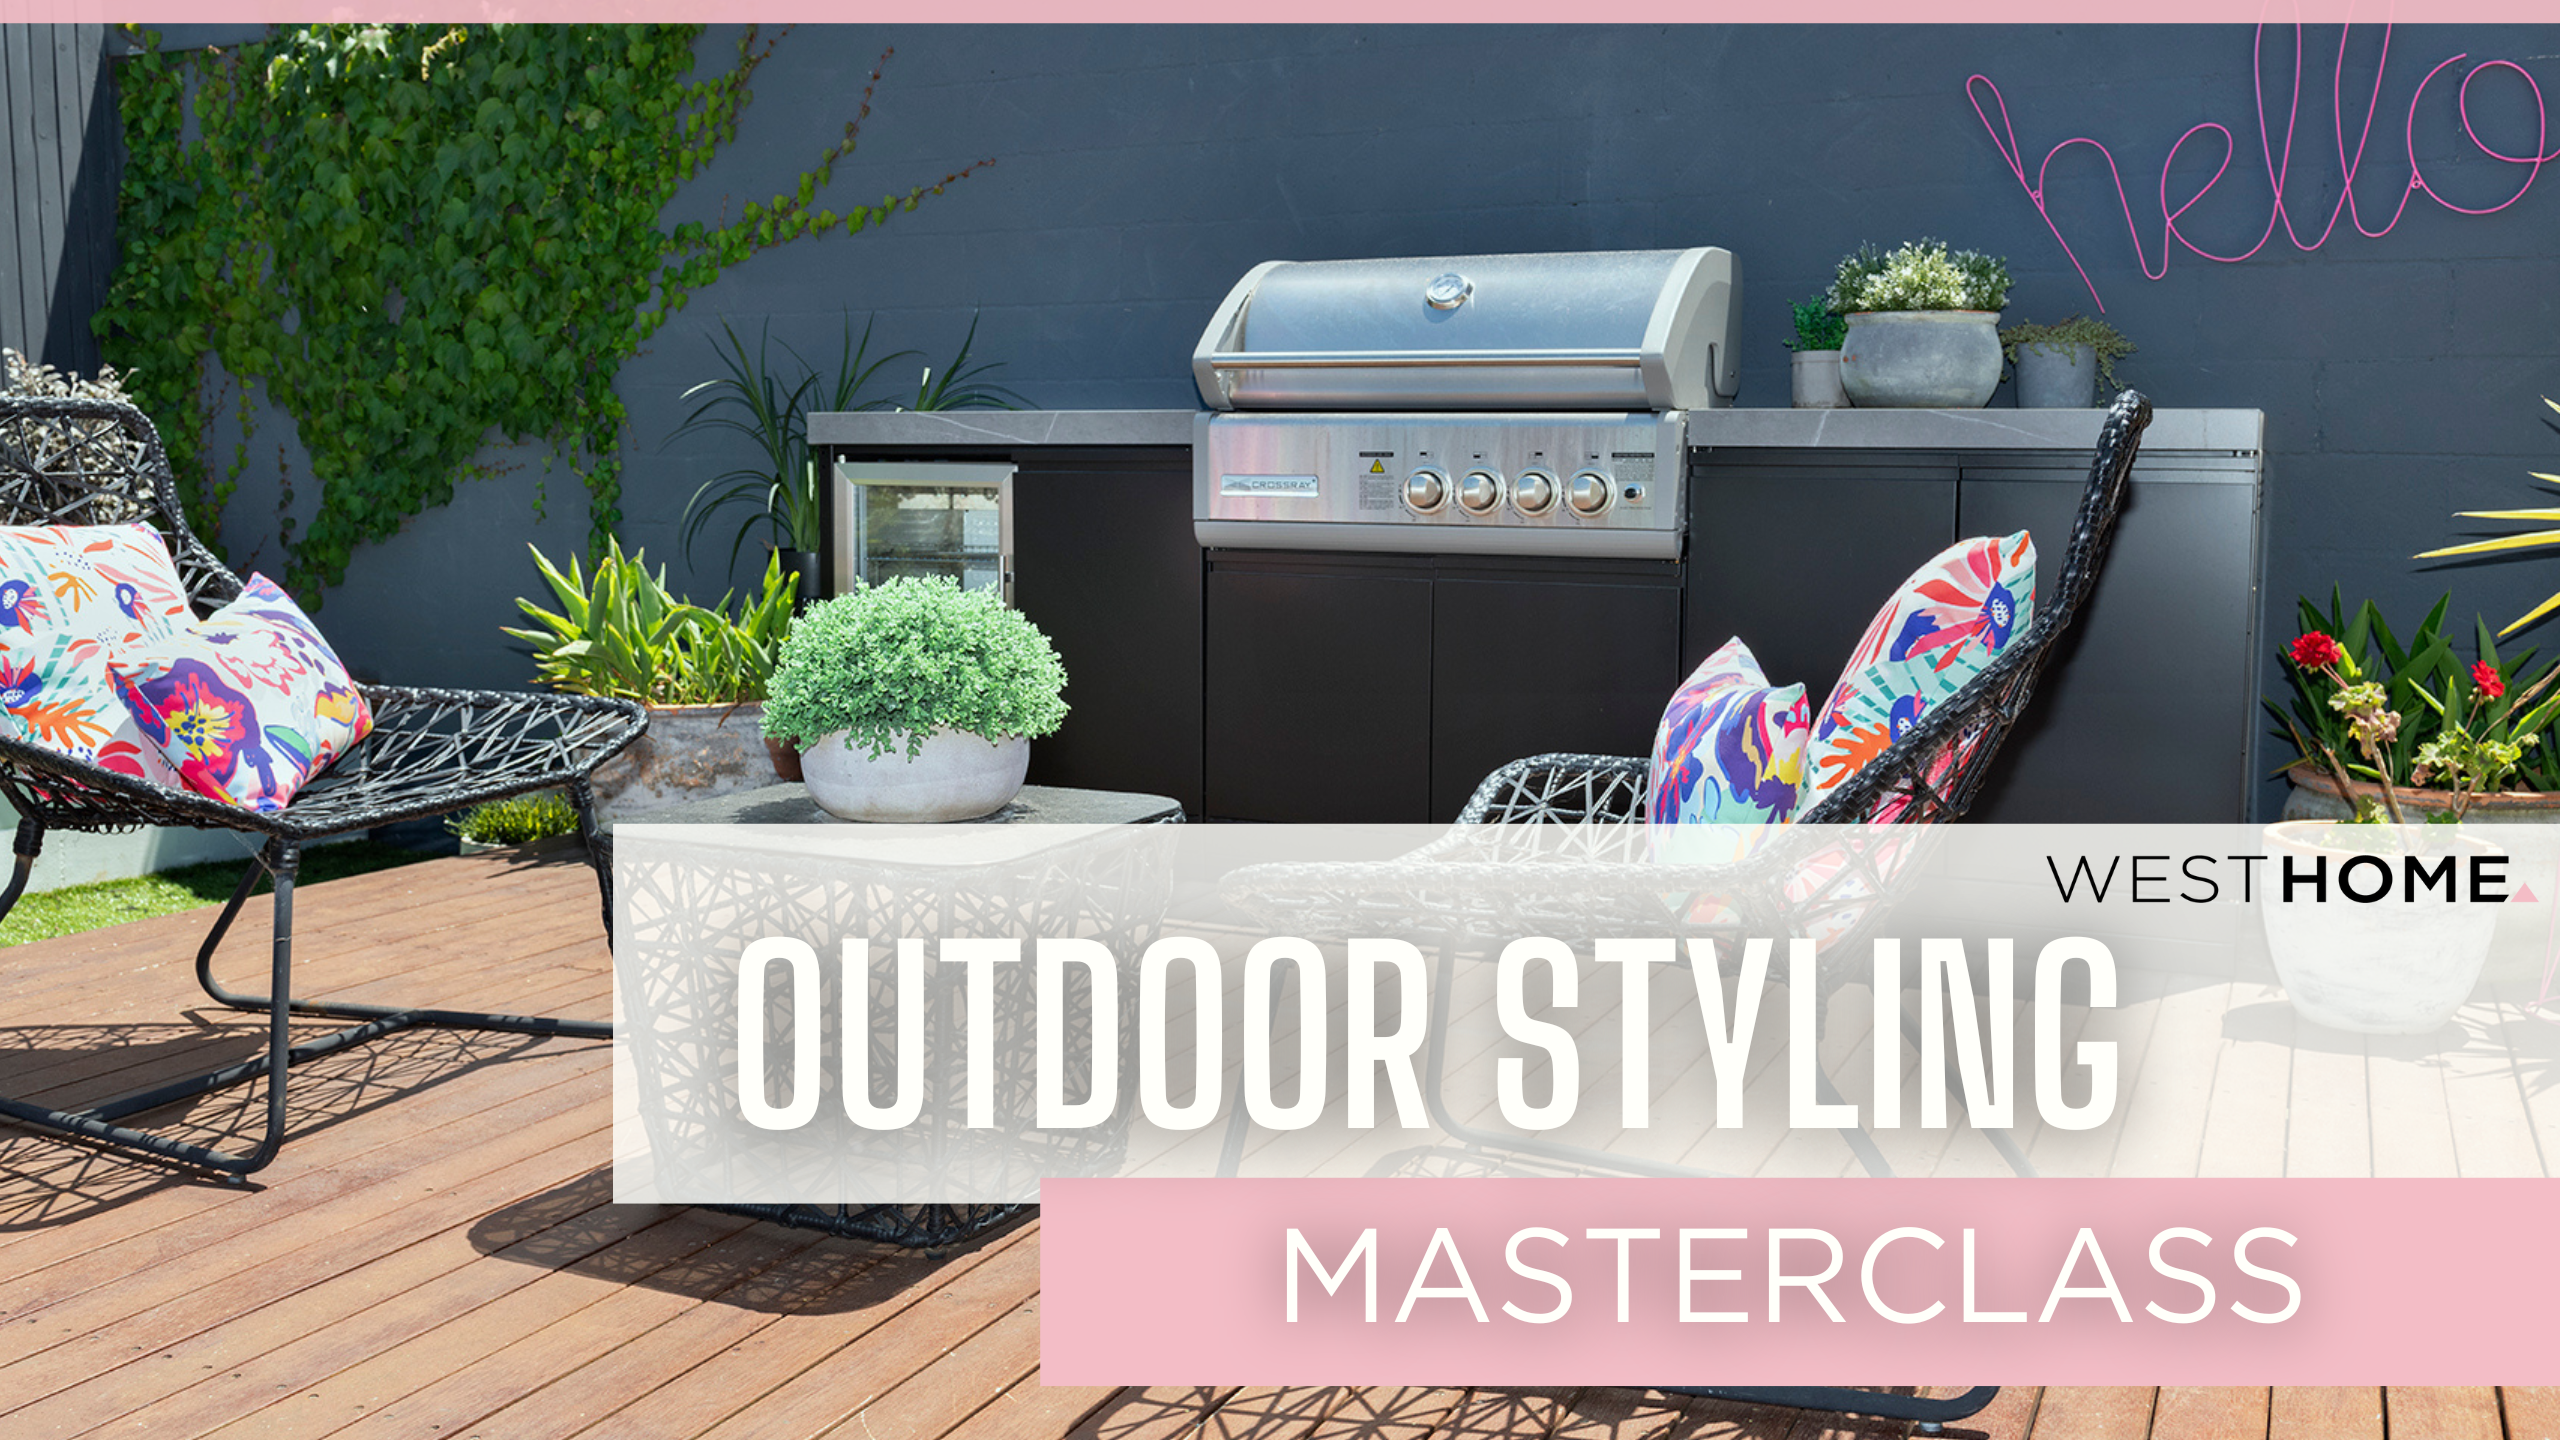 West Home Outdoor Styling Masterclass